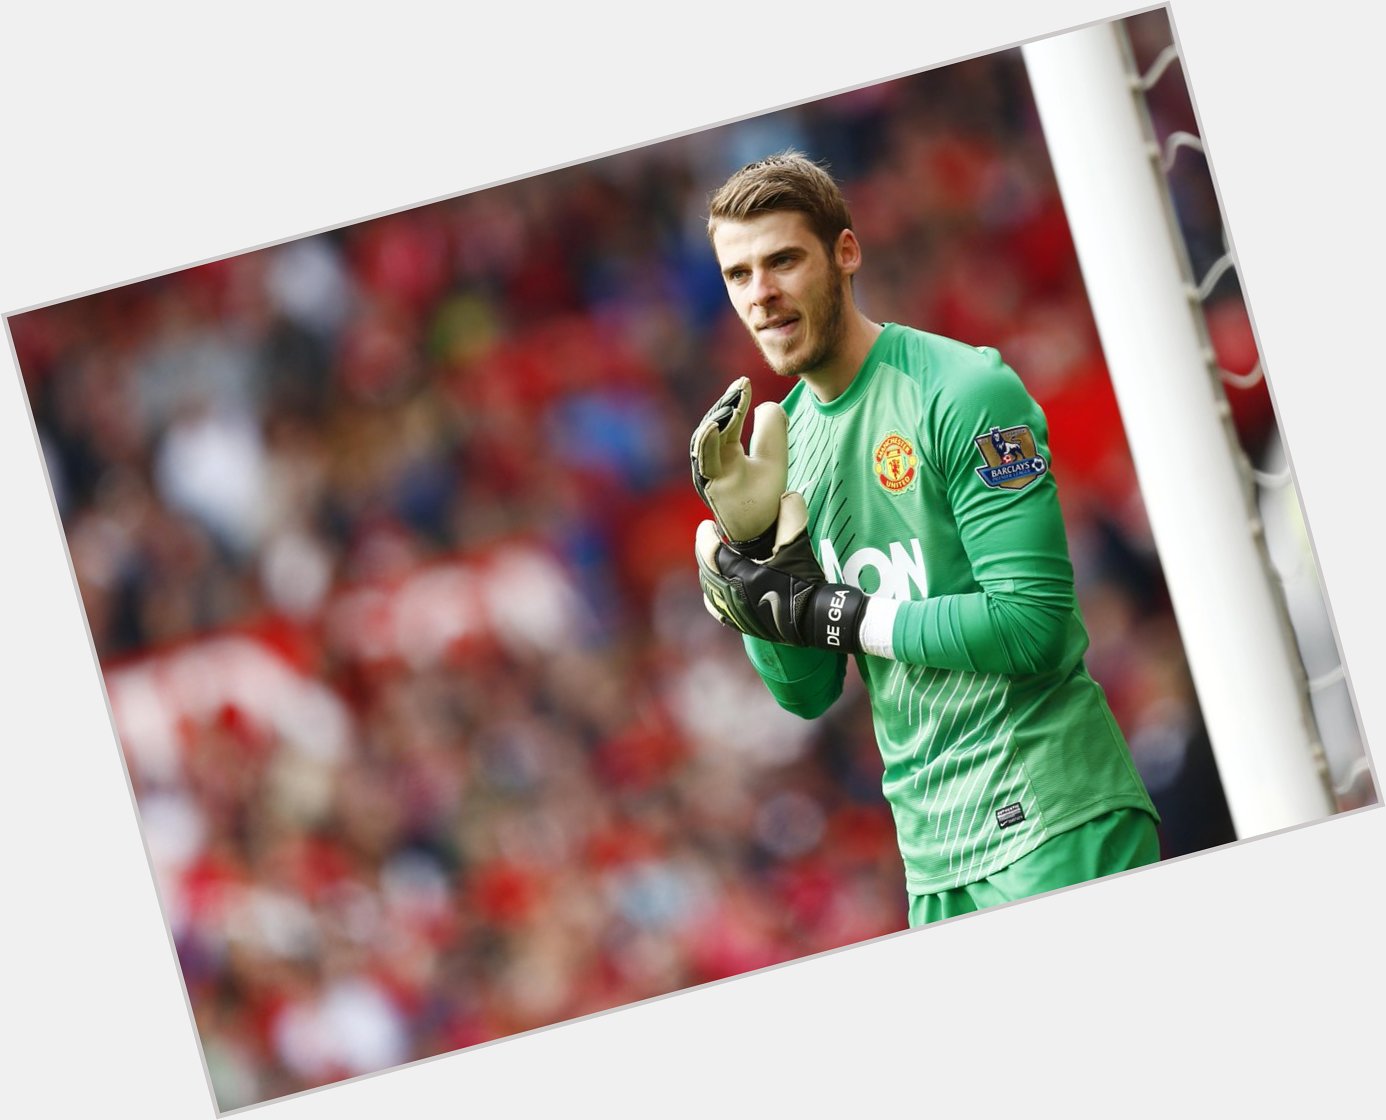 Happy 24th birthday to David de Gea today. Hes recorded 38 clean sheets in the Premier League for Man Utd. 